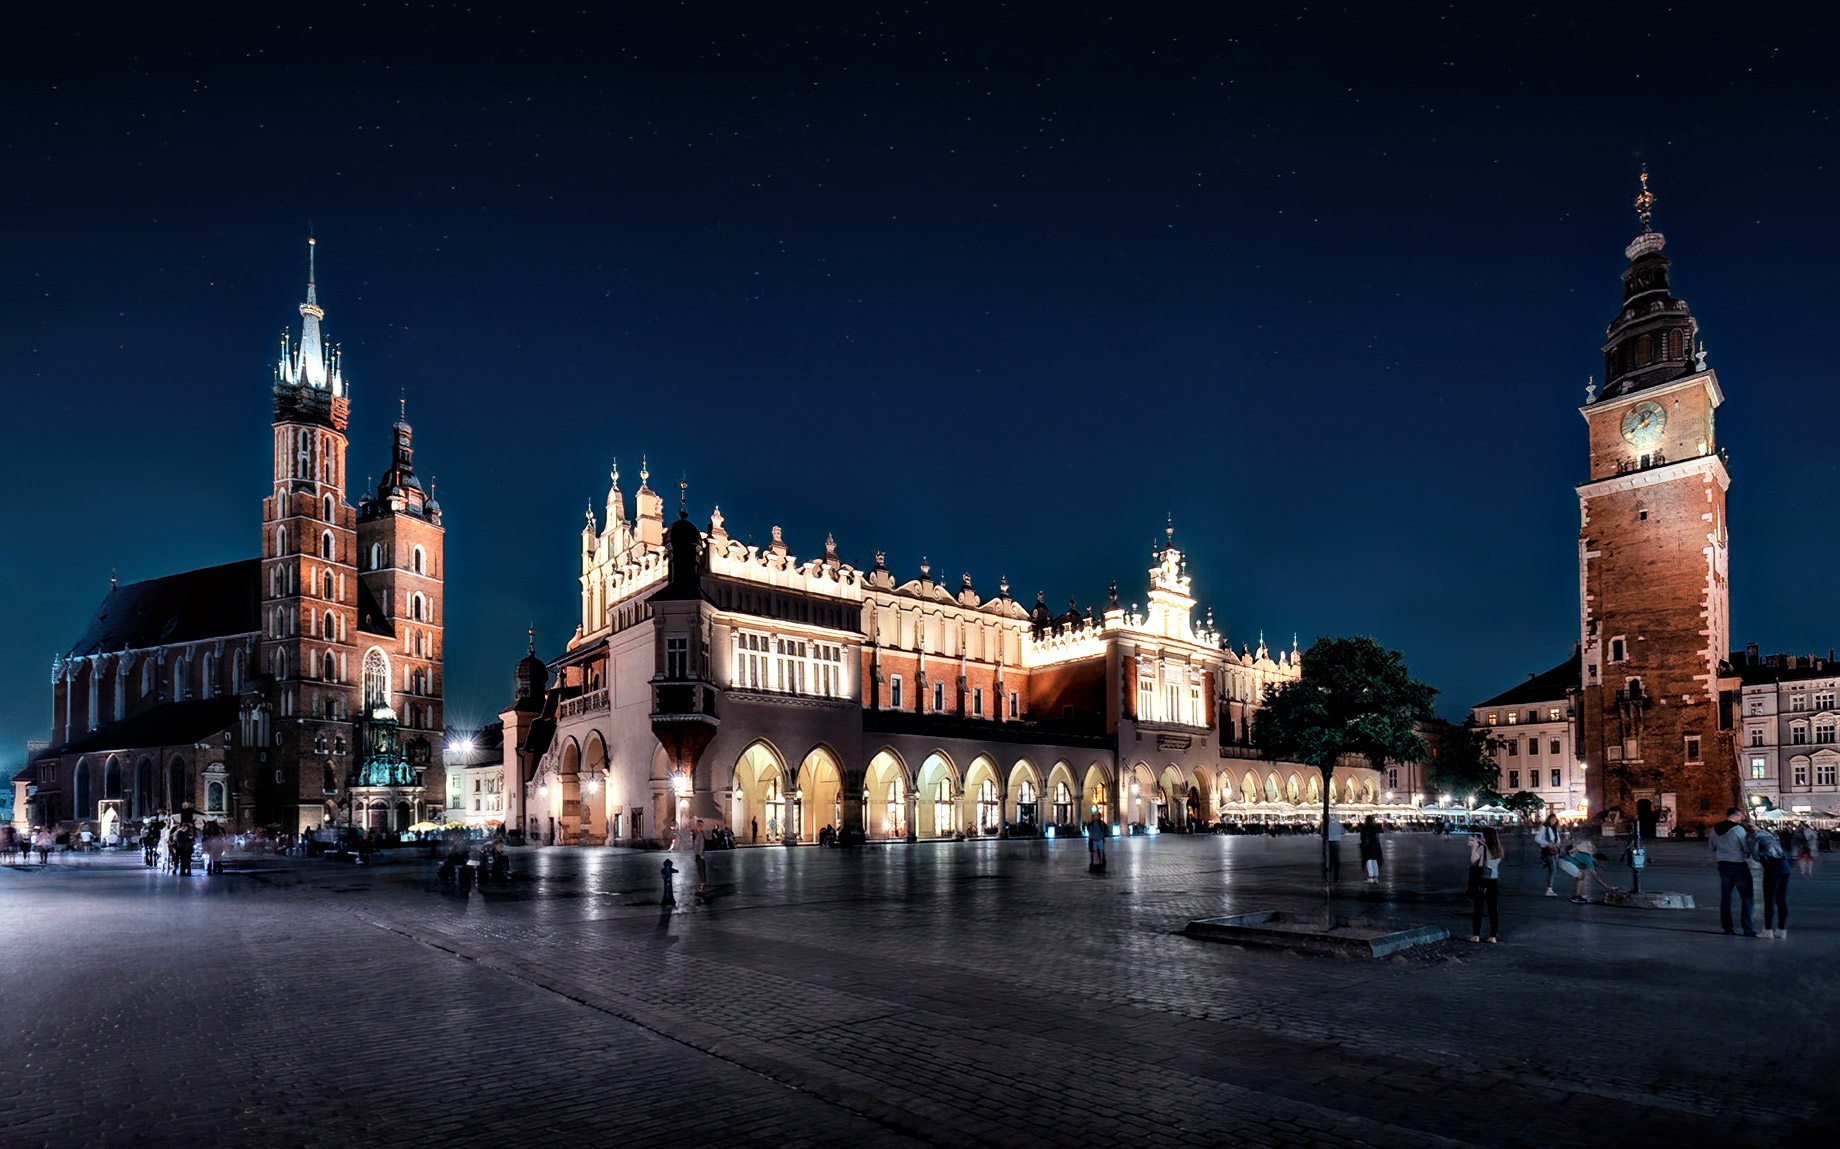 Kraków - A Royal Experience in the Heart of Poland